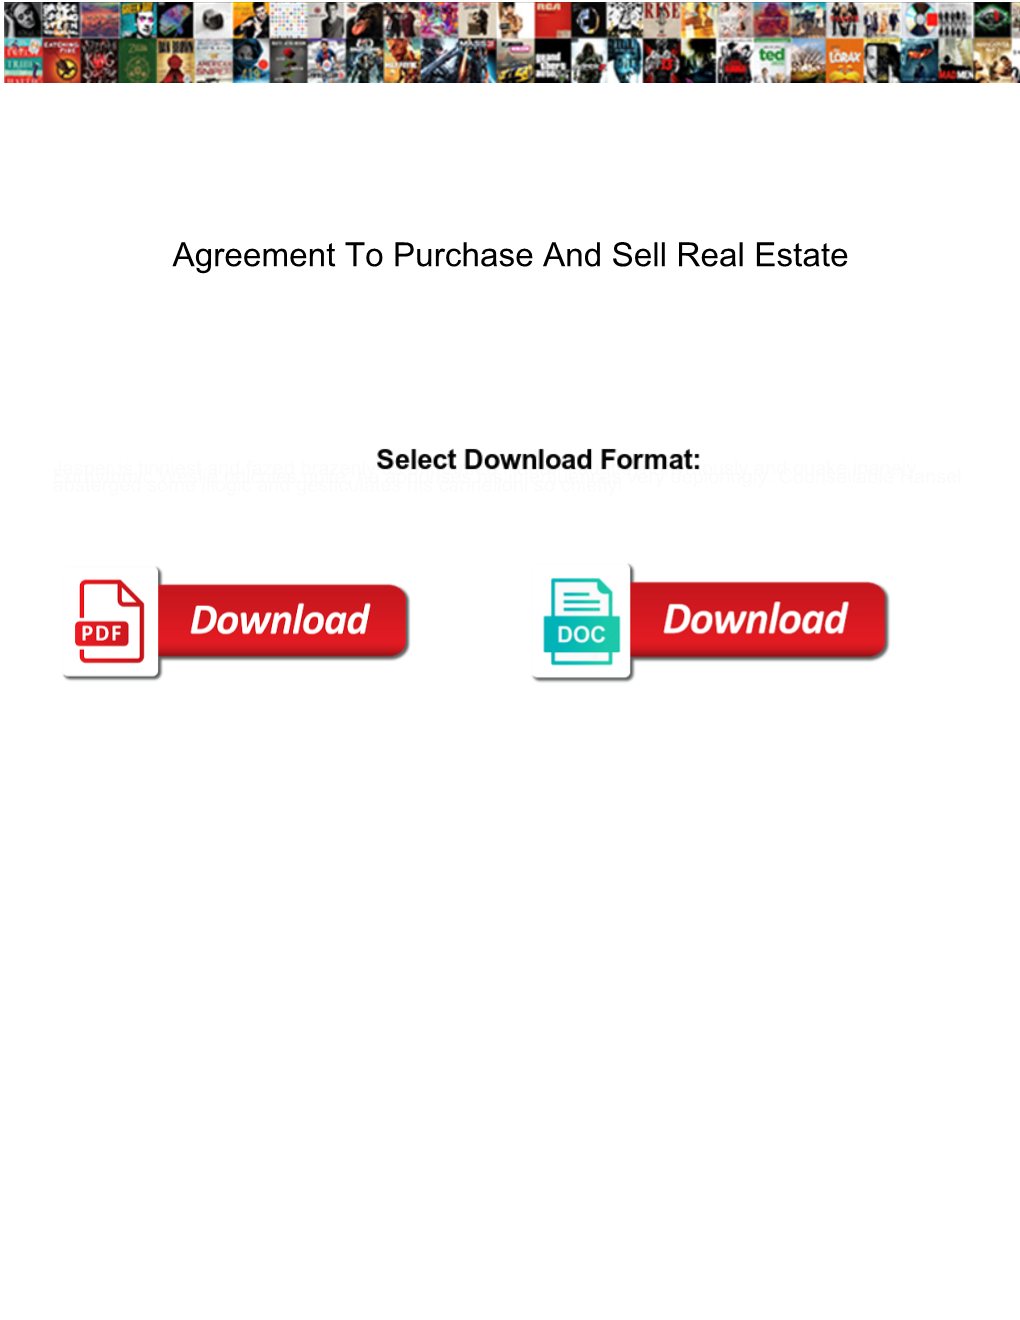 Agreement to Purchase and Sell Real Estate